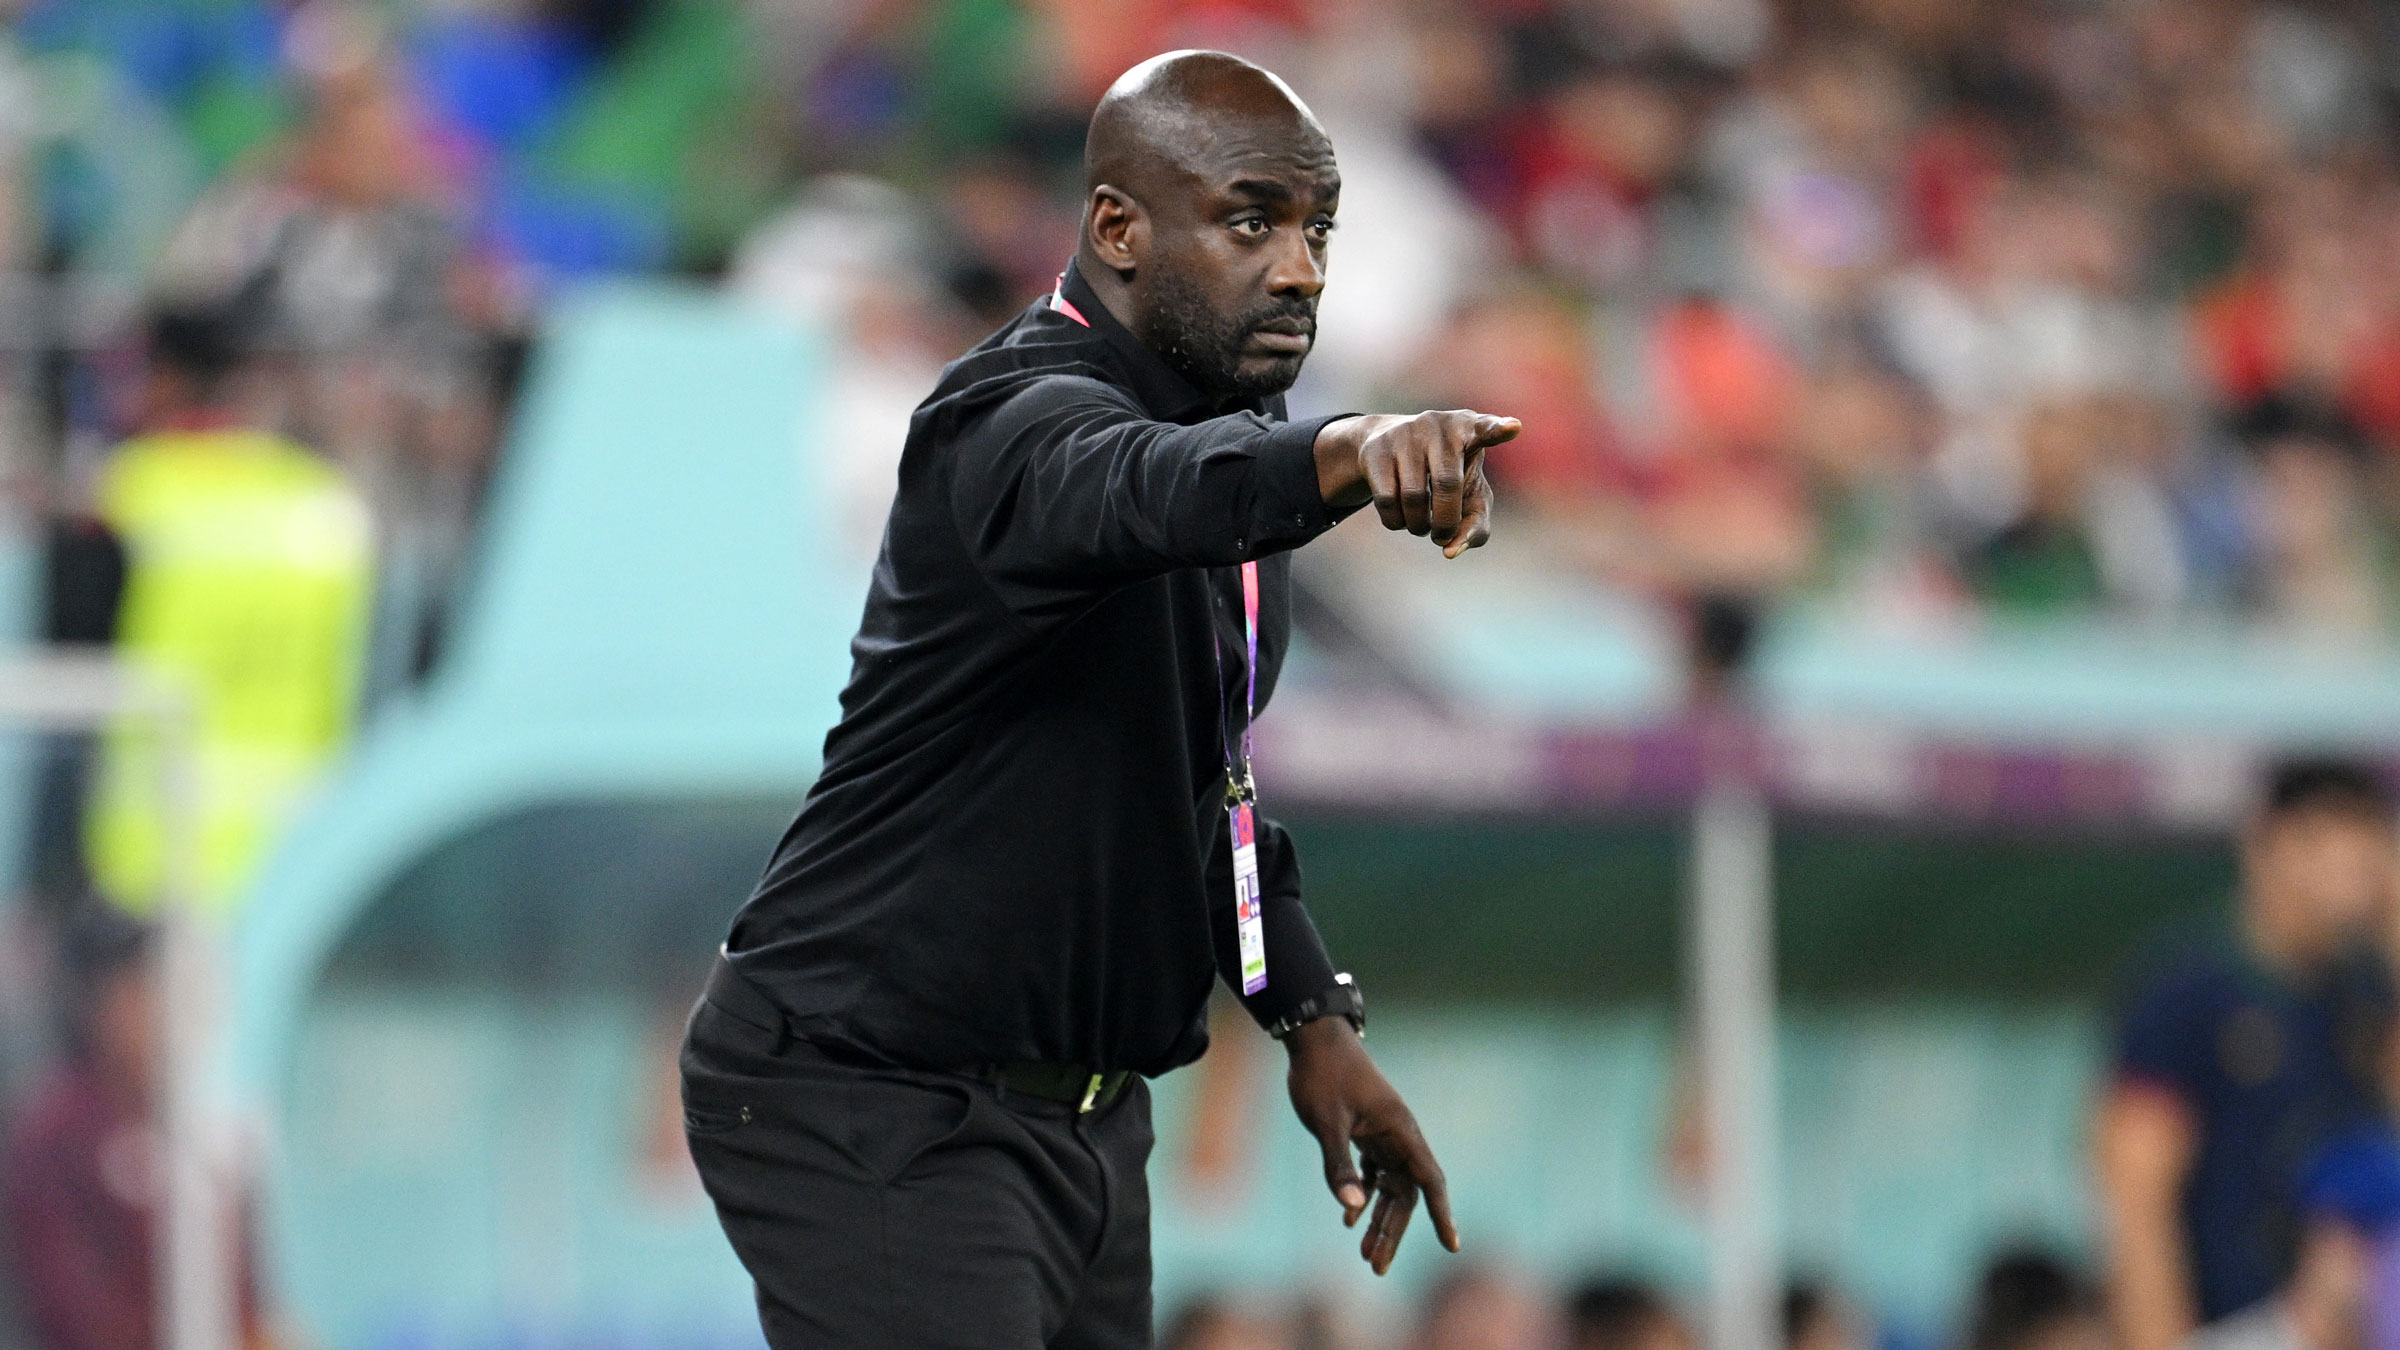 Ghana's Otto Addo gives his team instructions during the match against Portugal.